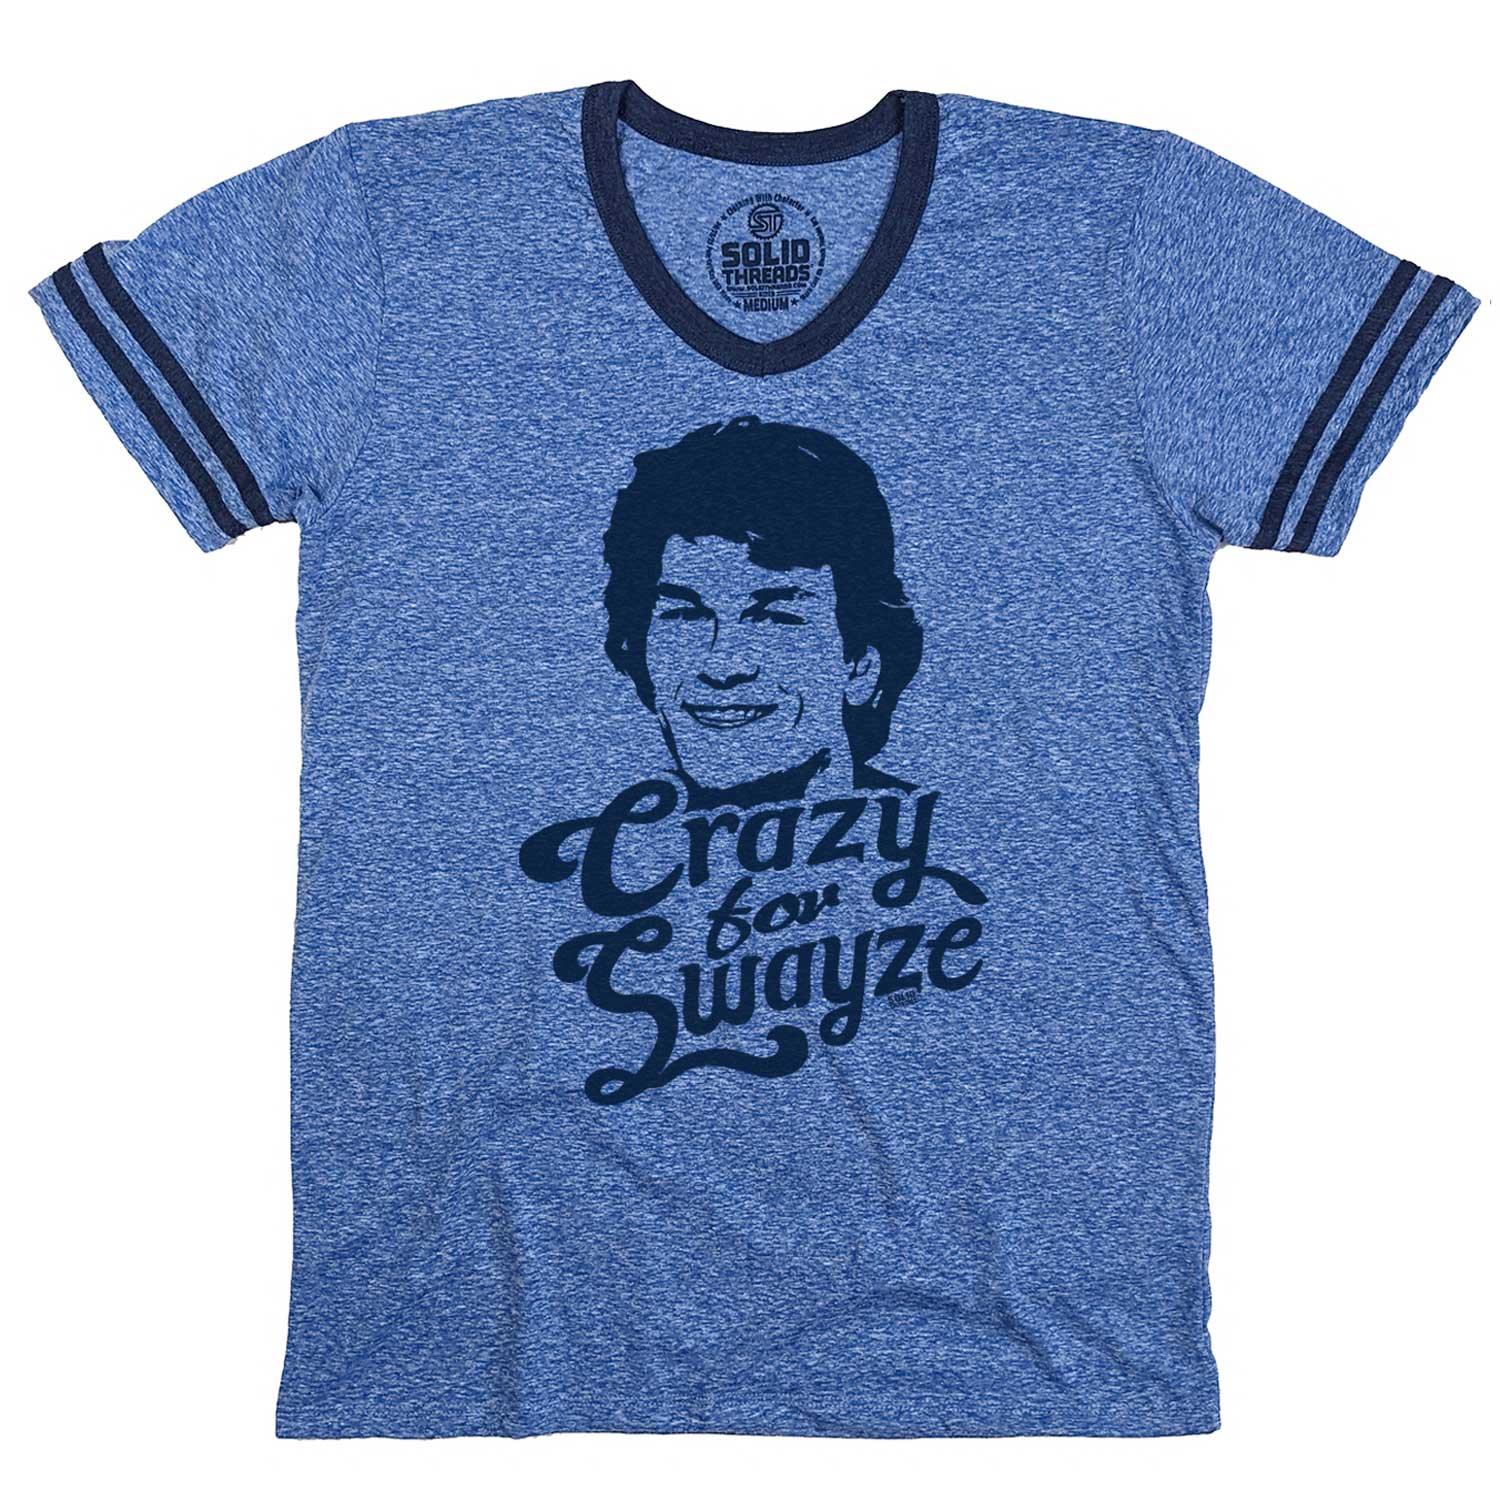 Men's Crazy for Swayze Vintage Graphic V-Neck Tee | Funny Patrick Swayze T-shirt | Solid Threads